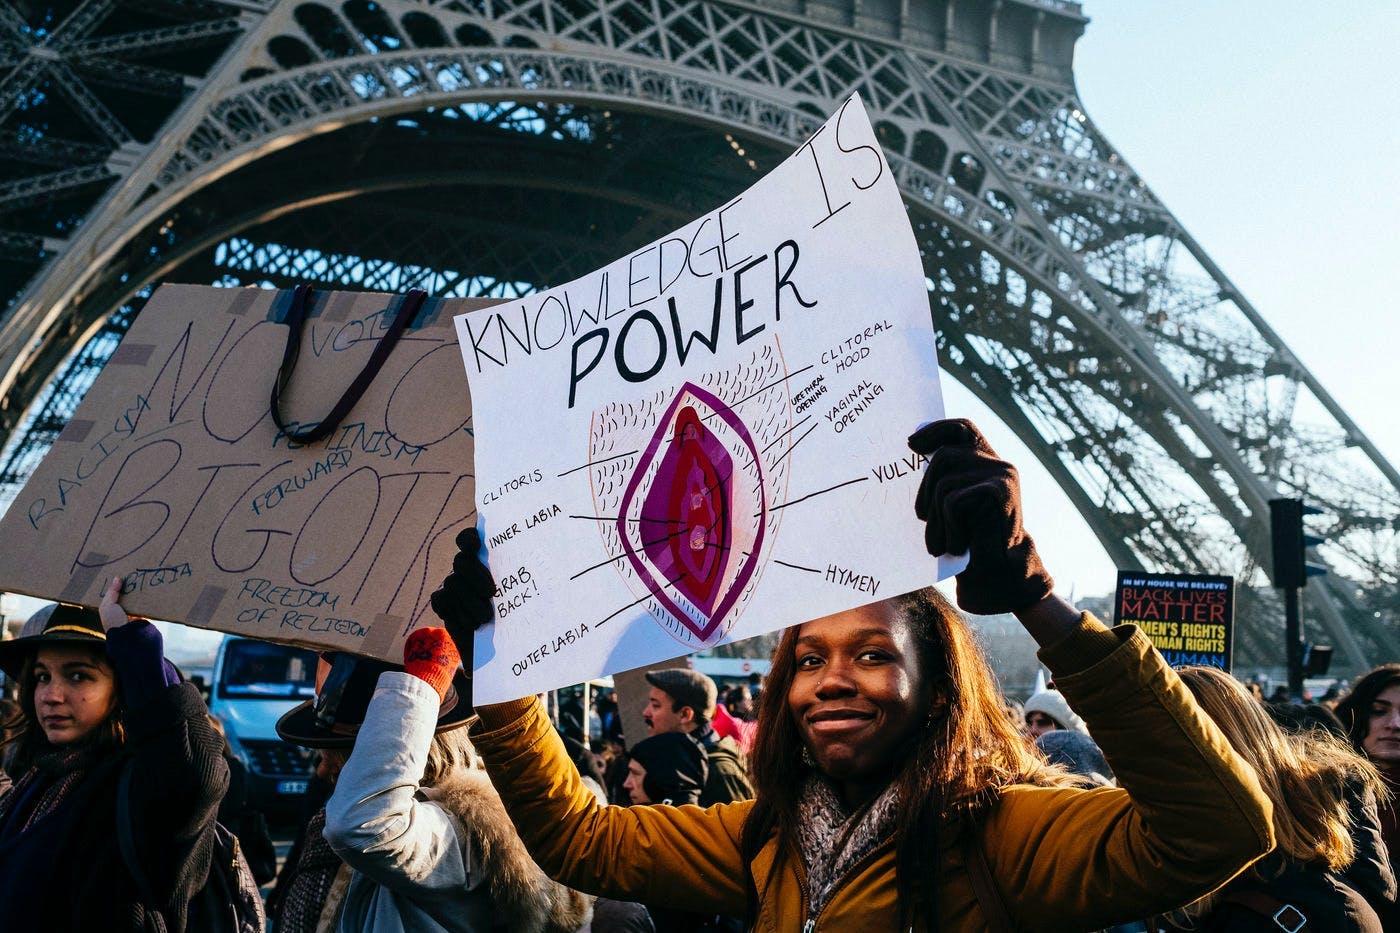 marche americains american americans eiffel tower femmes march paris power pussy pussy power tour eiffel trocadero trump women women's march idf text person human crowd protest parade banner